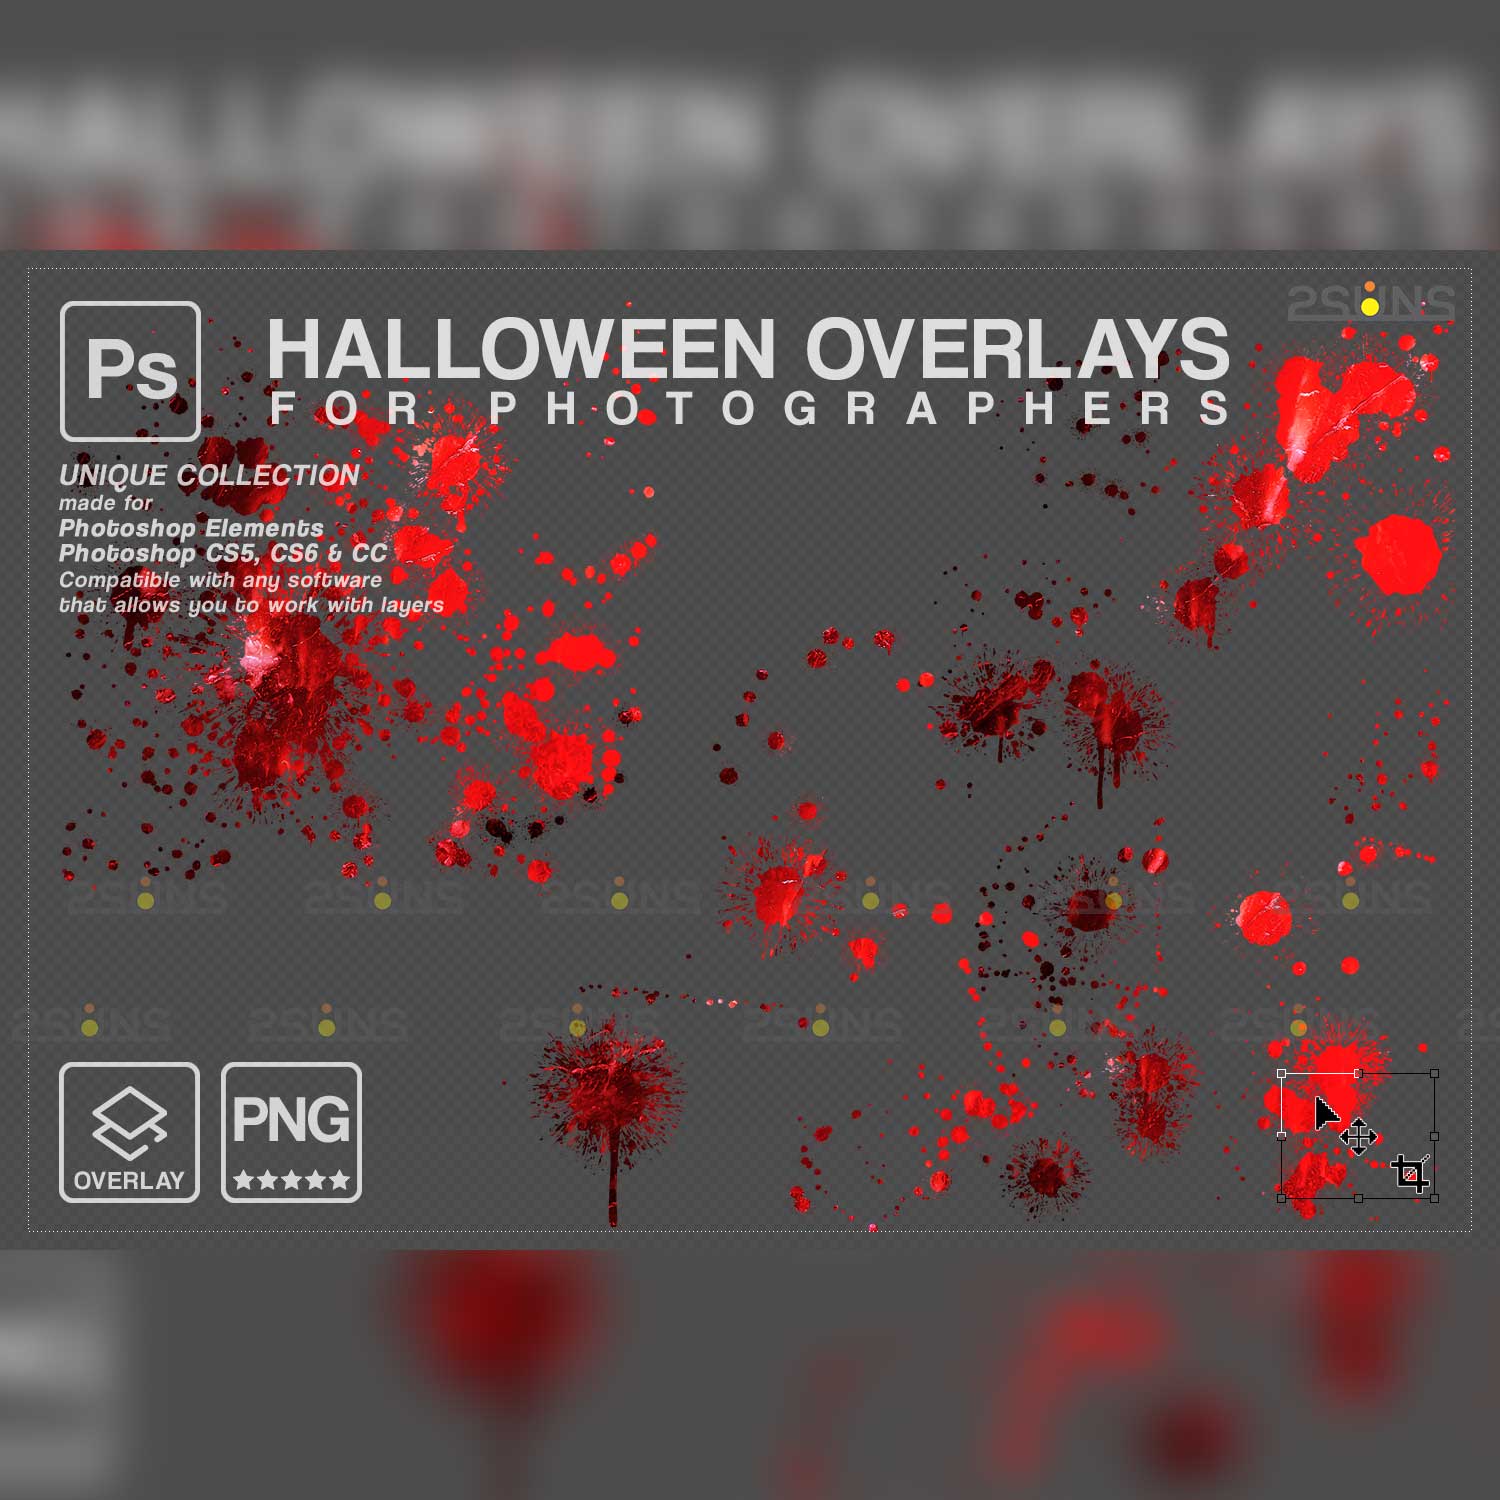 Halloween Wounds and Scars Blood Splatter Photoshop Overlay previews.